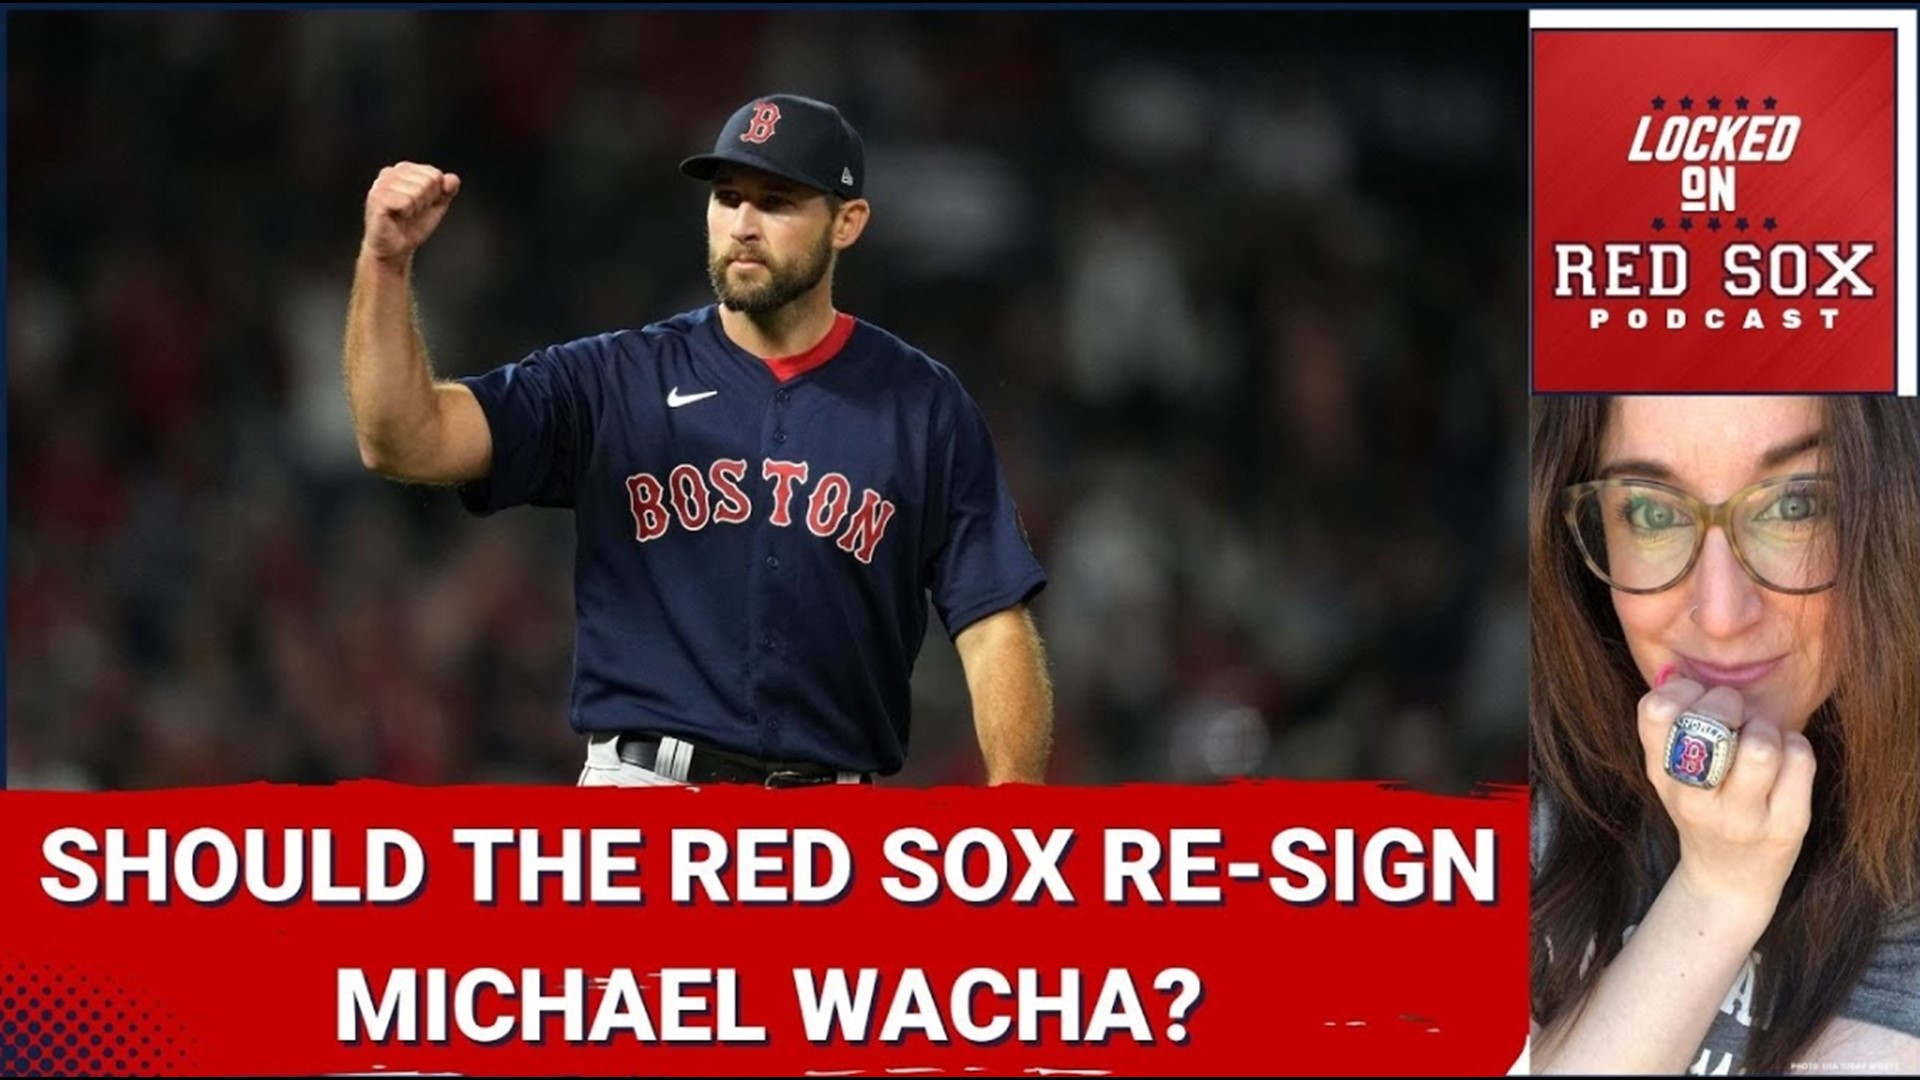 Michael Wacha remains a free agent as of Feb. 3, 2023 -- should the Red Sox re-sign the pitcher?